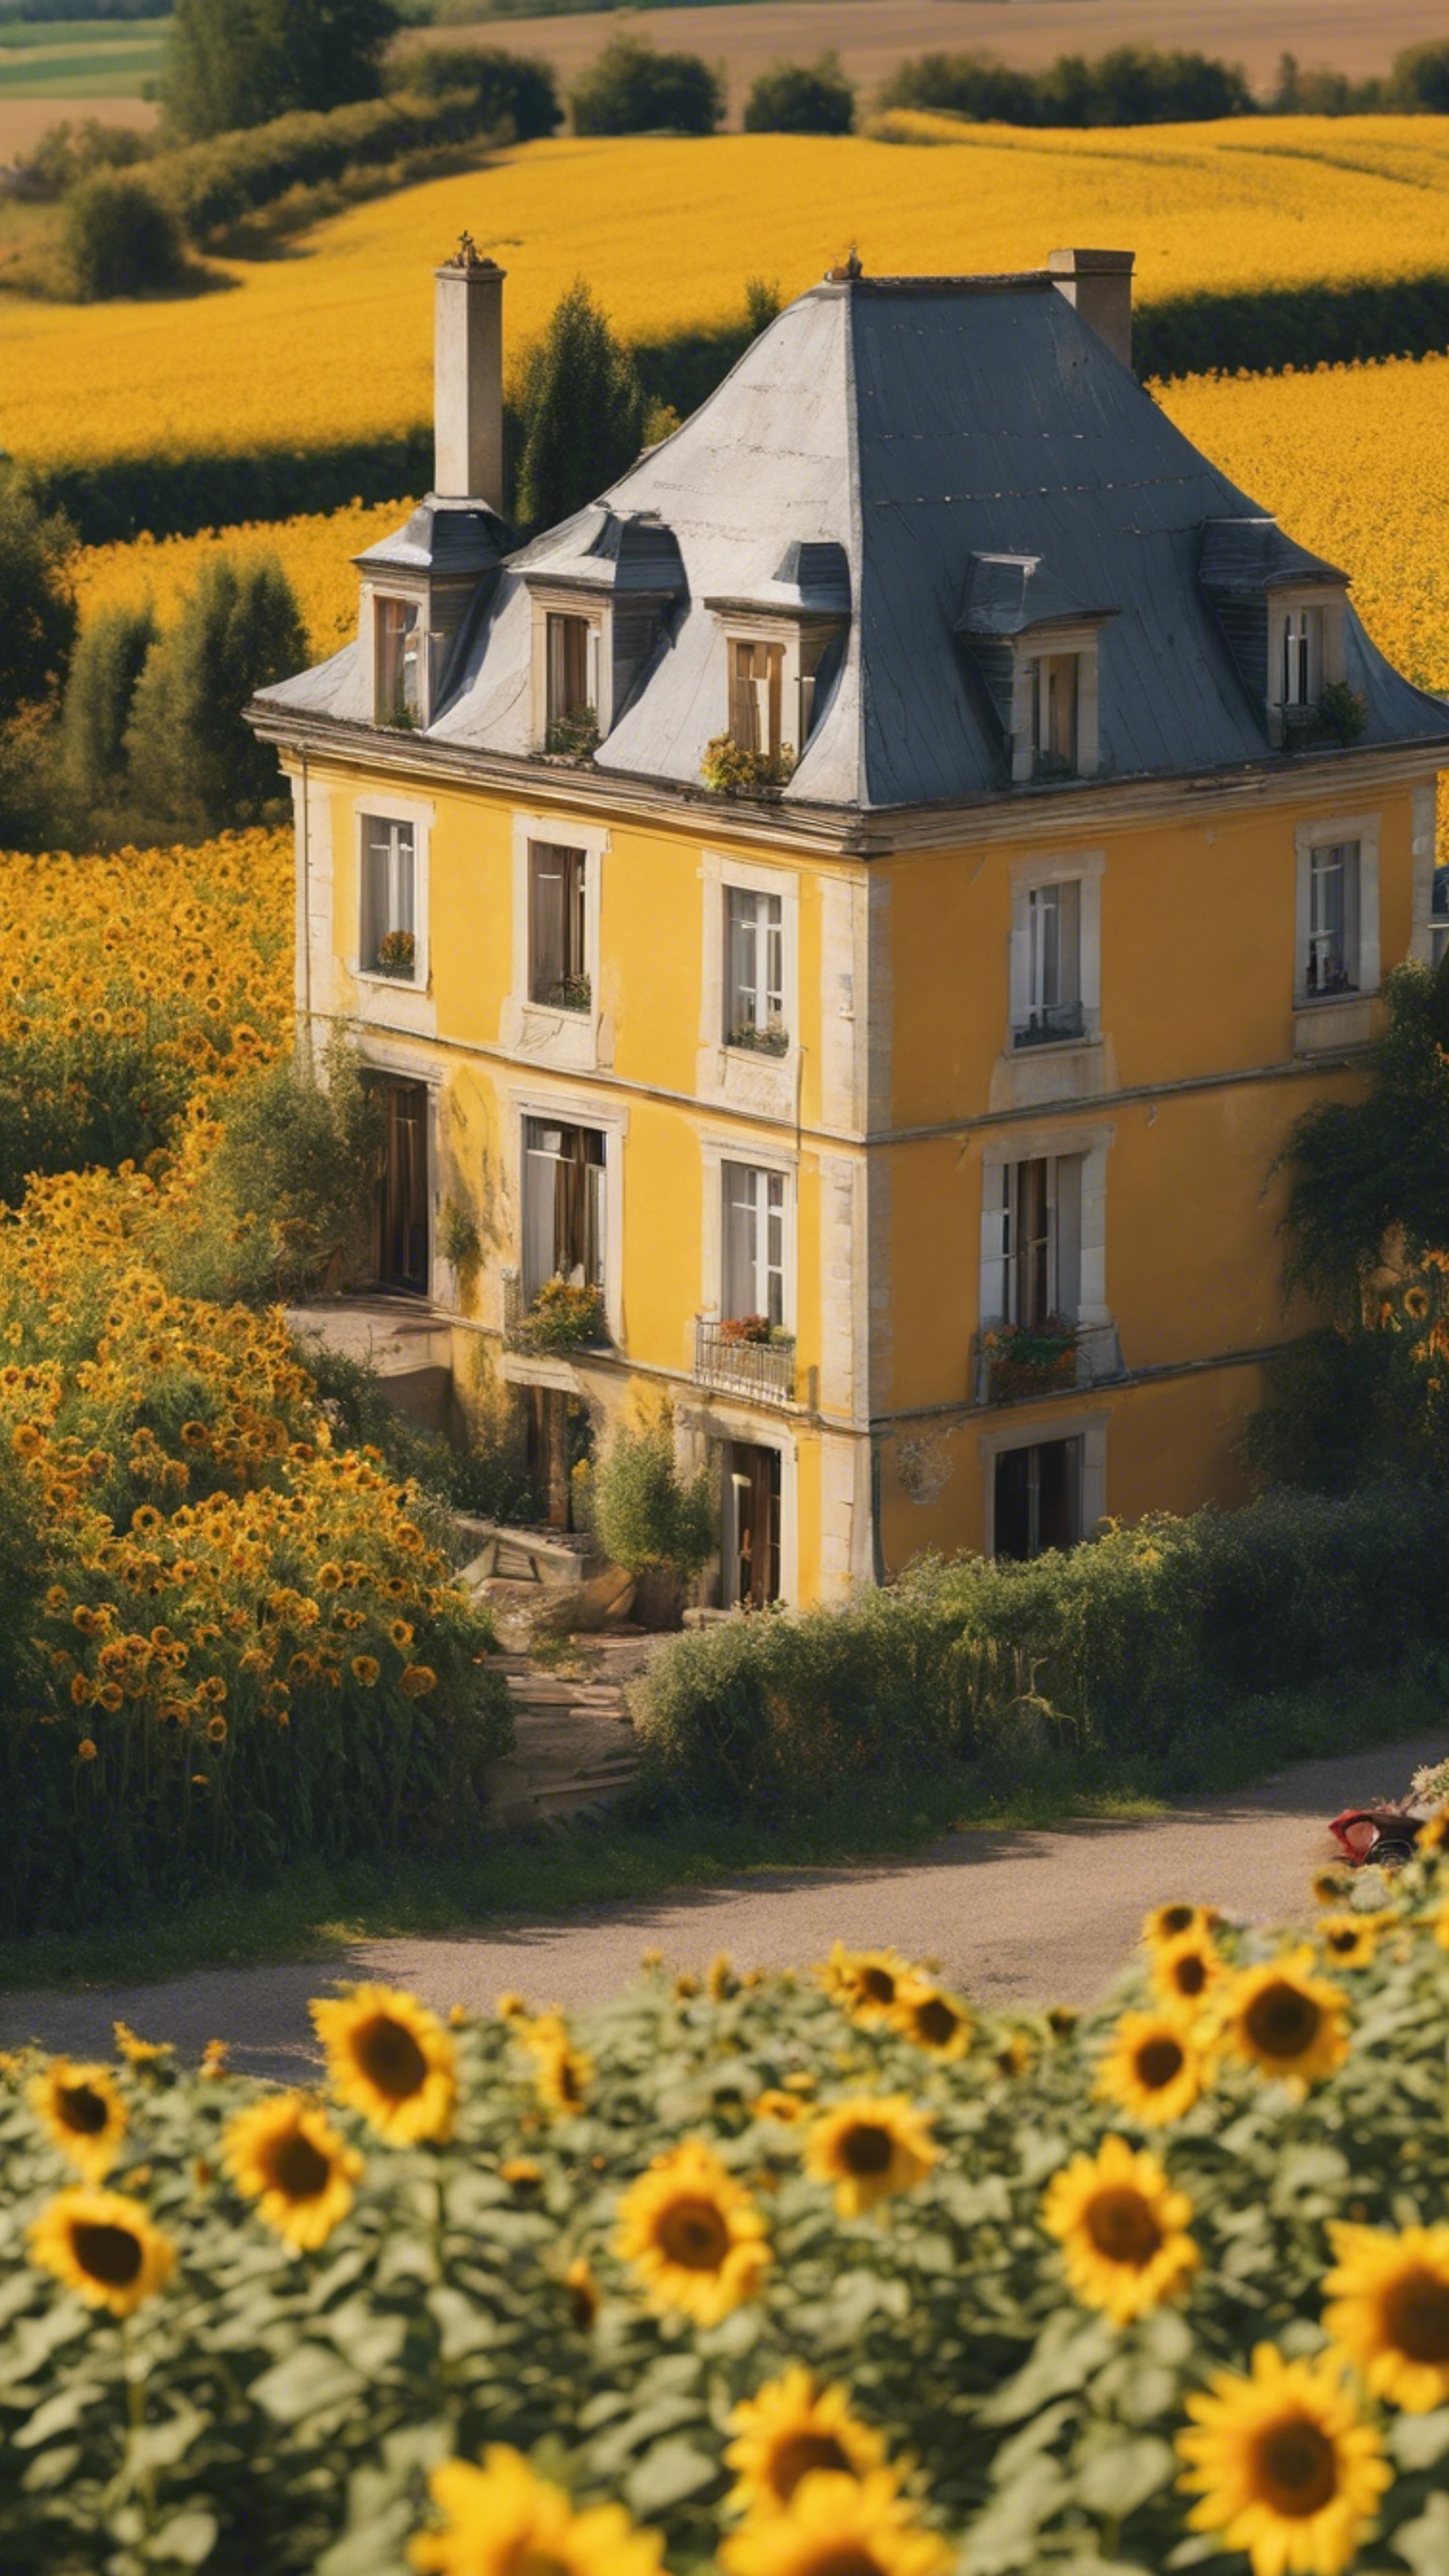 A quaint French country house nestled in a field of bright yellow sunflowers during a sunny afternoon. Fond d'écran[7540a515ea0143d58f51]